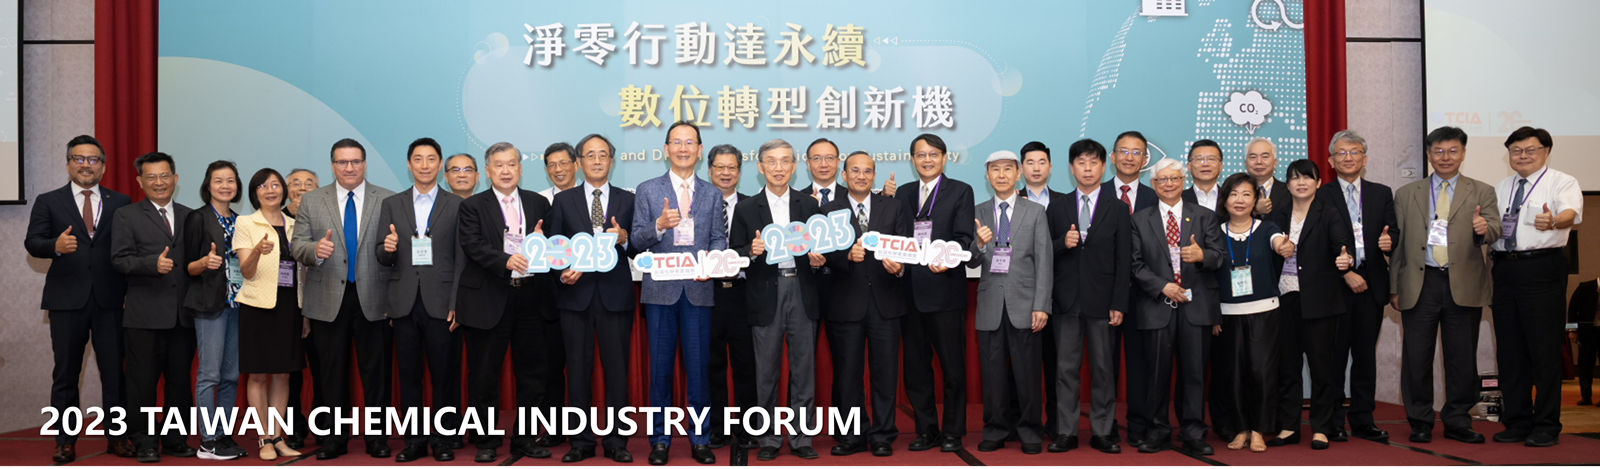 2023 Chemical Industry Forum-group photo